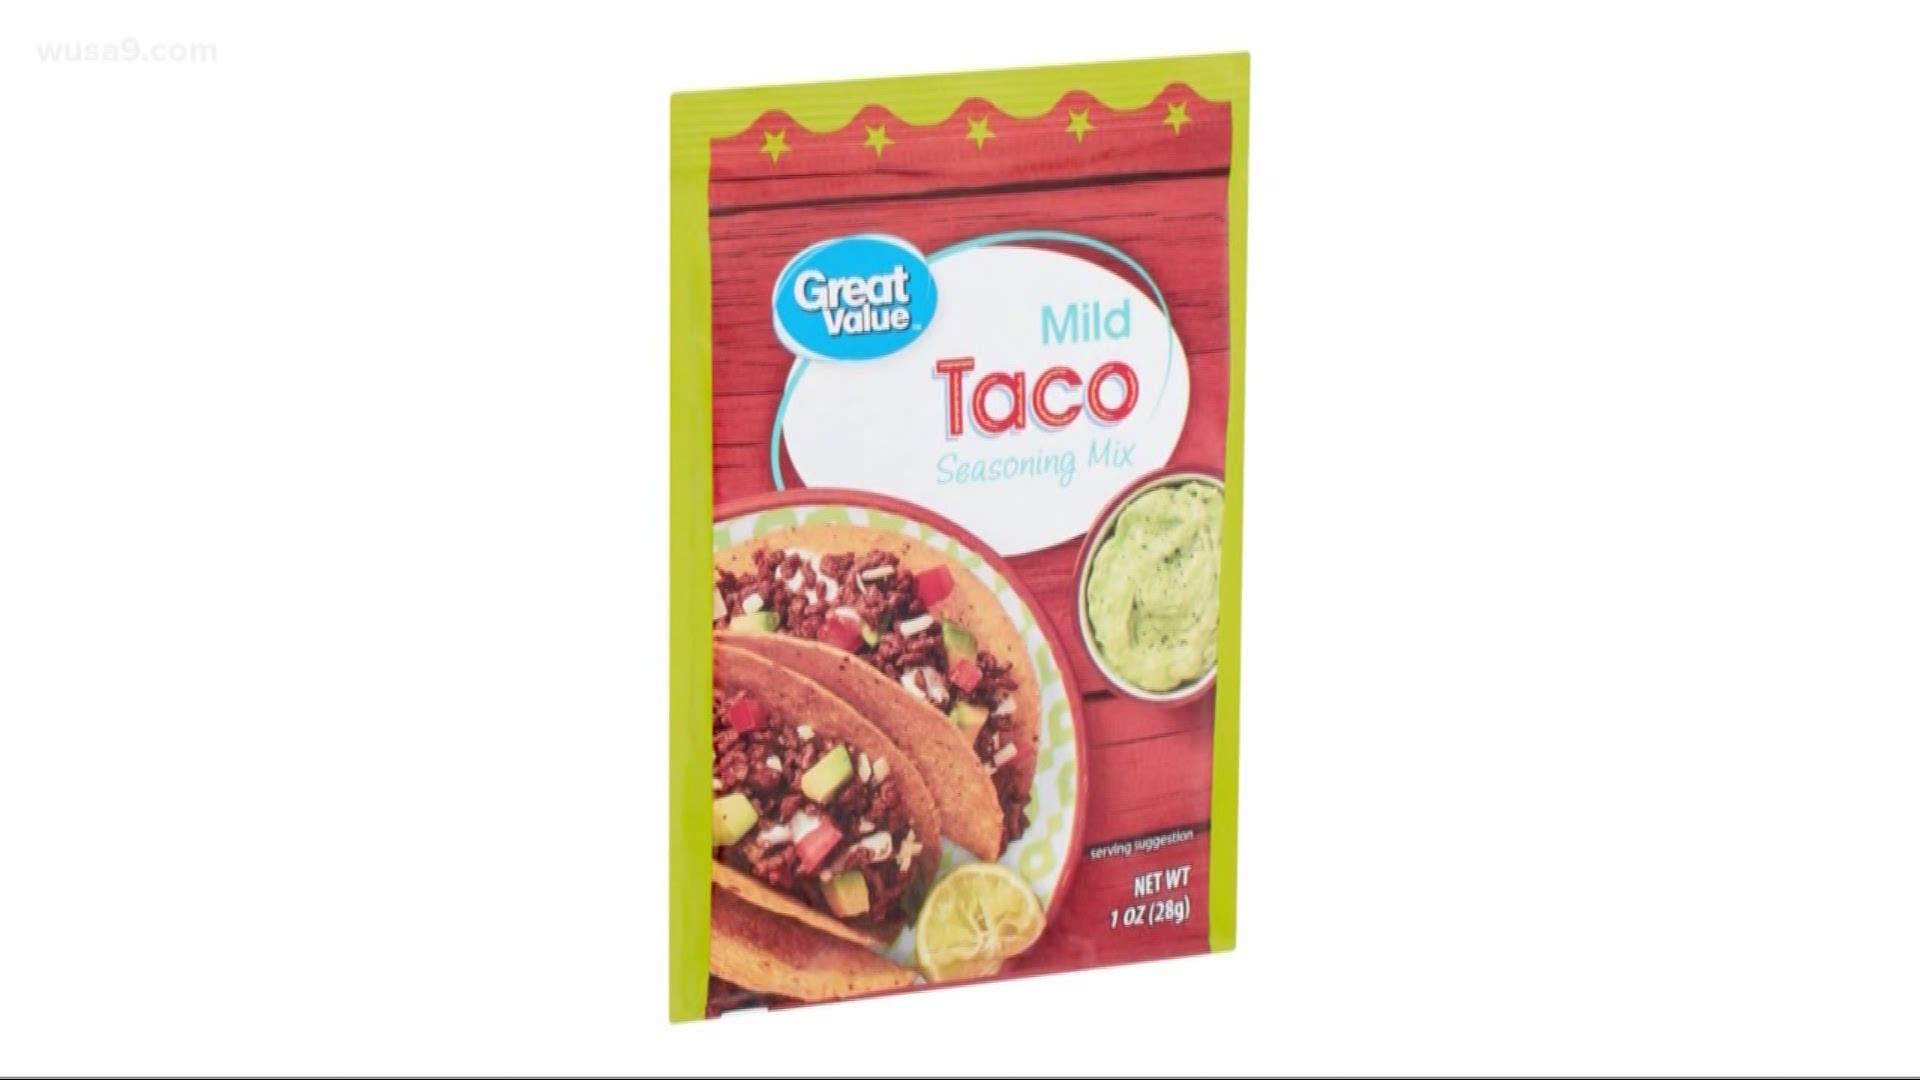 Salmonella concerns have caused a recall of taco seasoning mixes that were sold at Walmart.